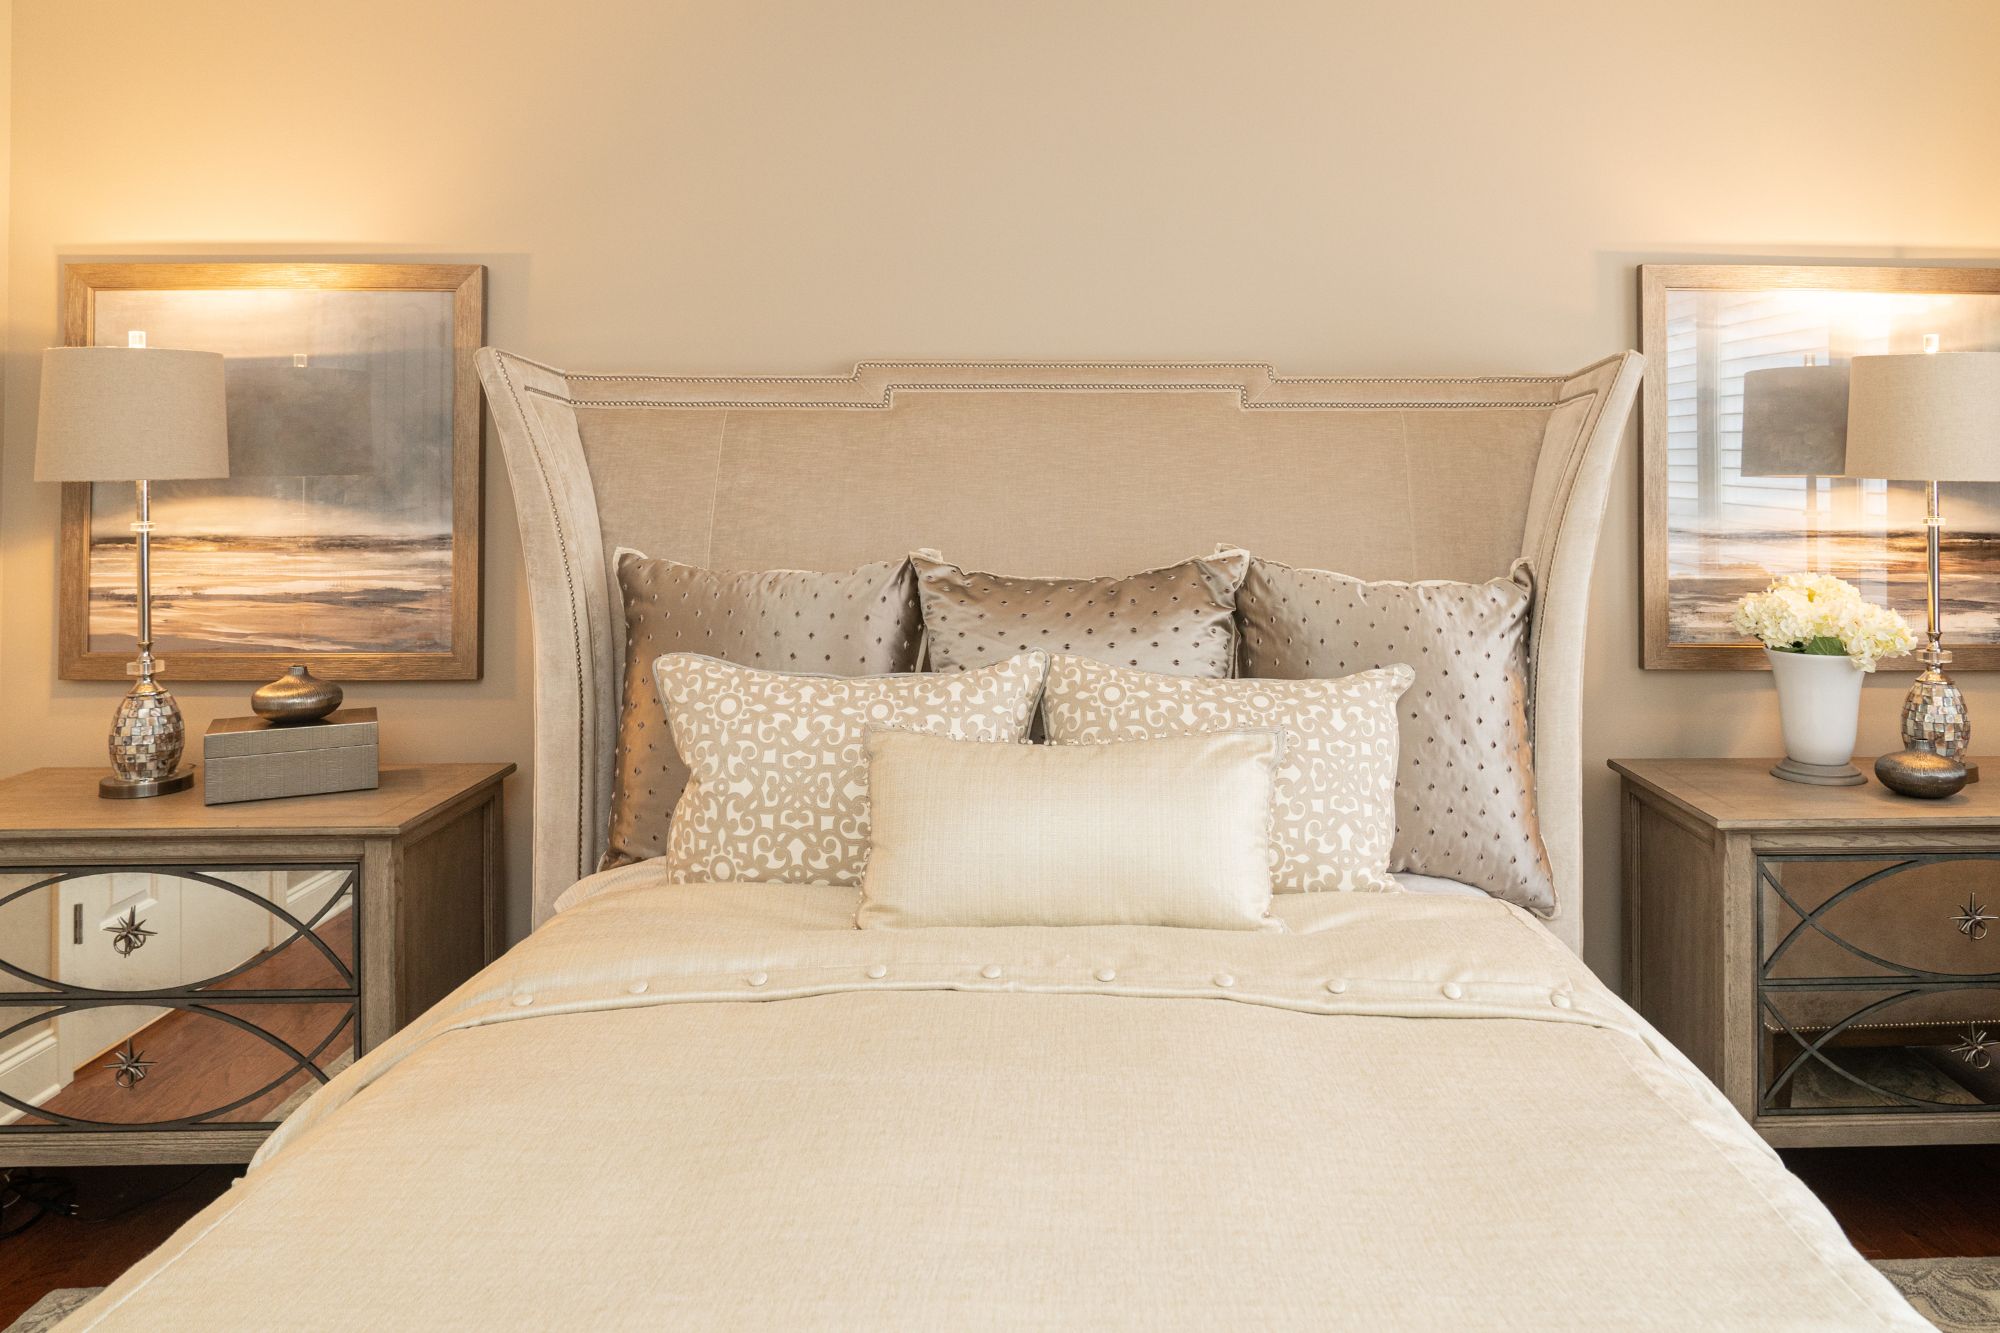 Common bedroom design mistakes (and how to avoid them)